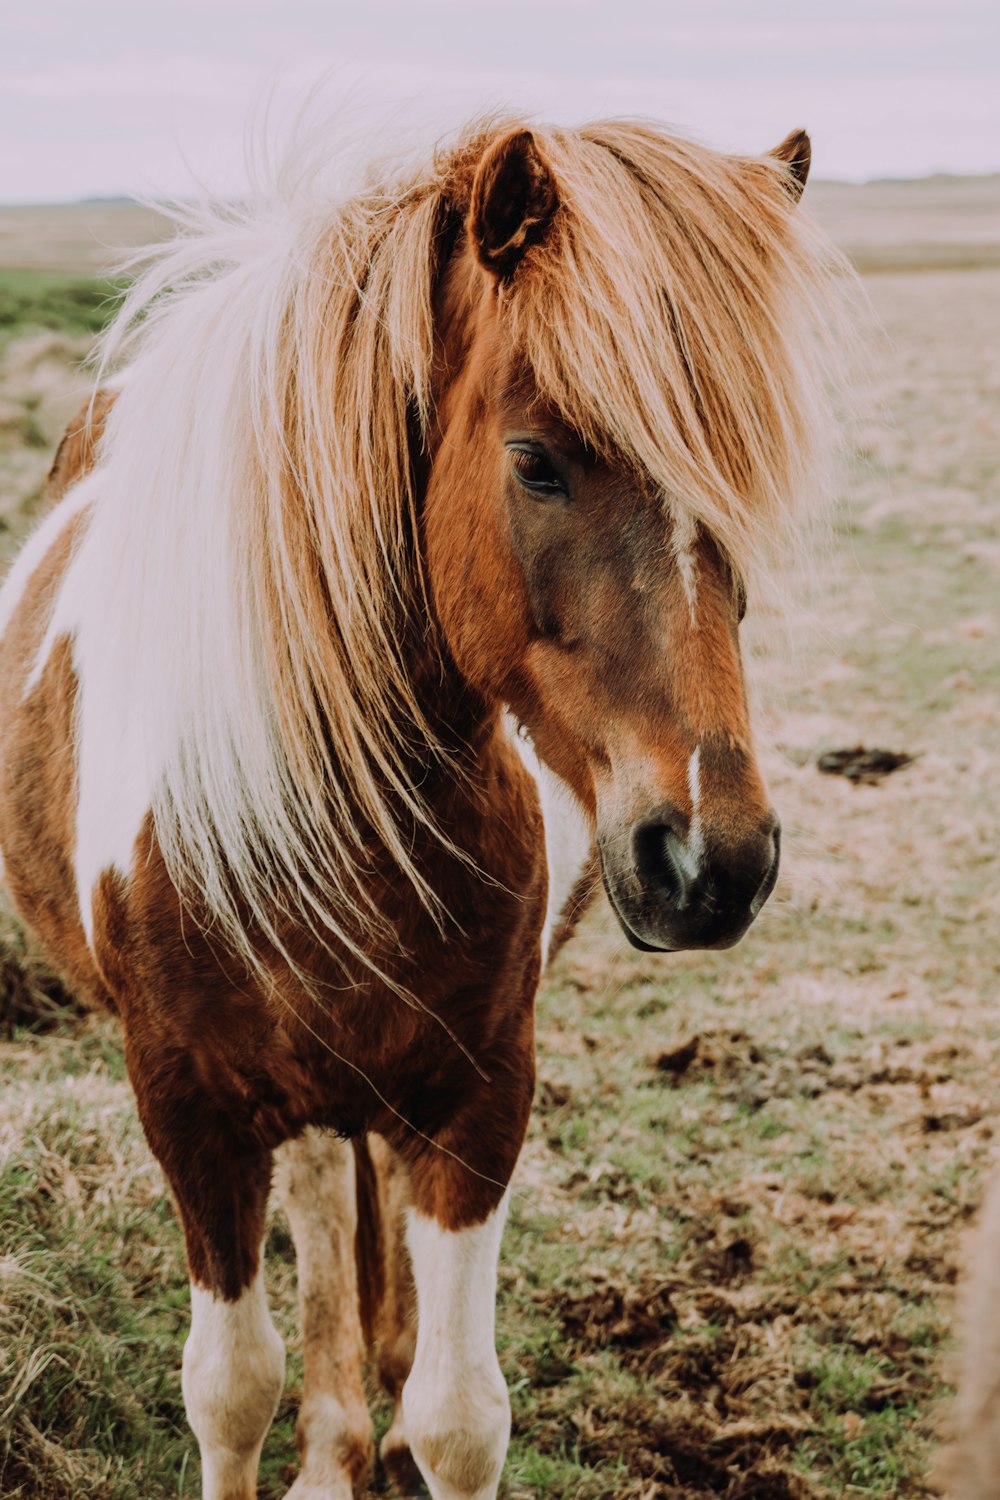 500+ Pony Pictures [HD] | Download Free Images on Unsplash